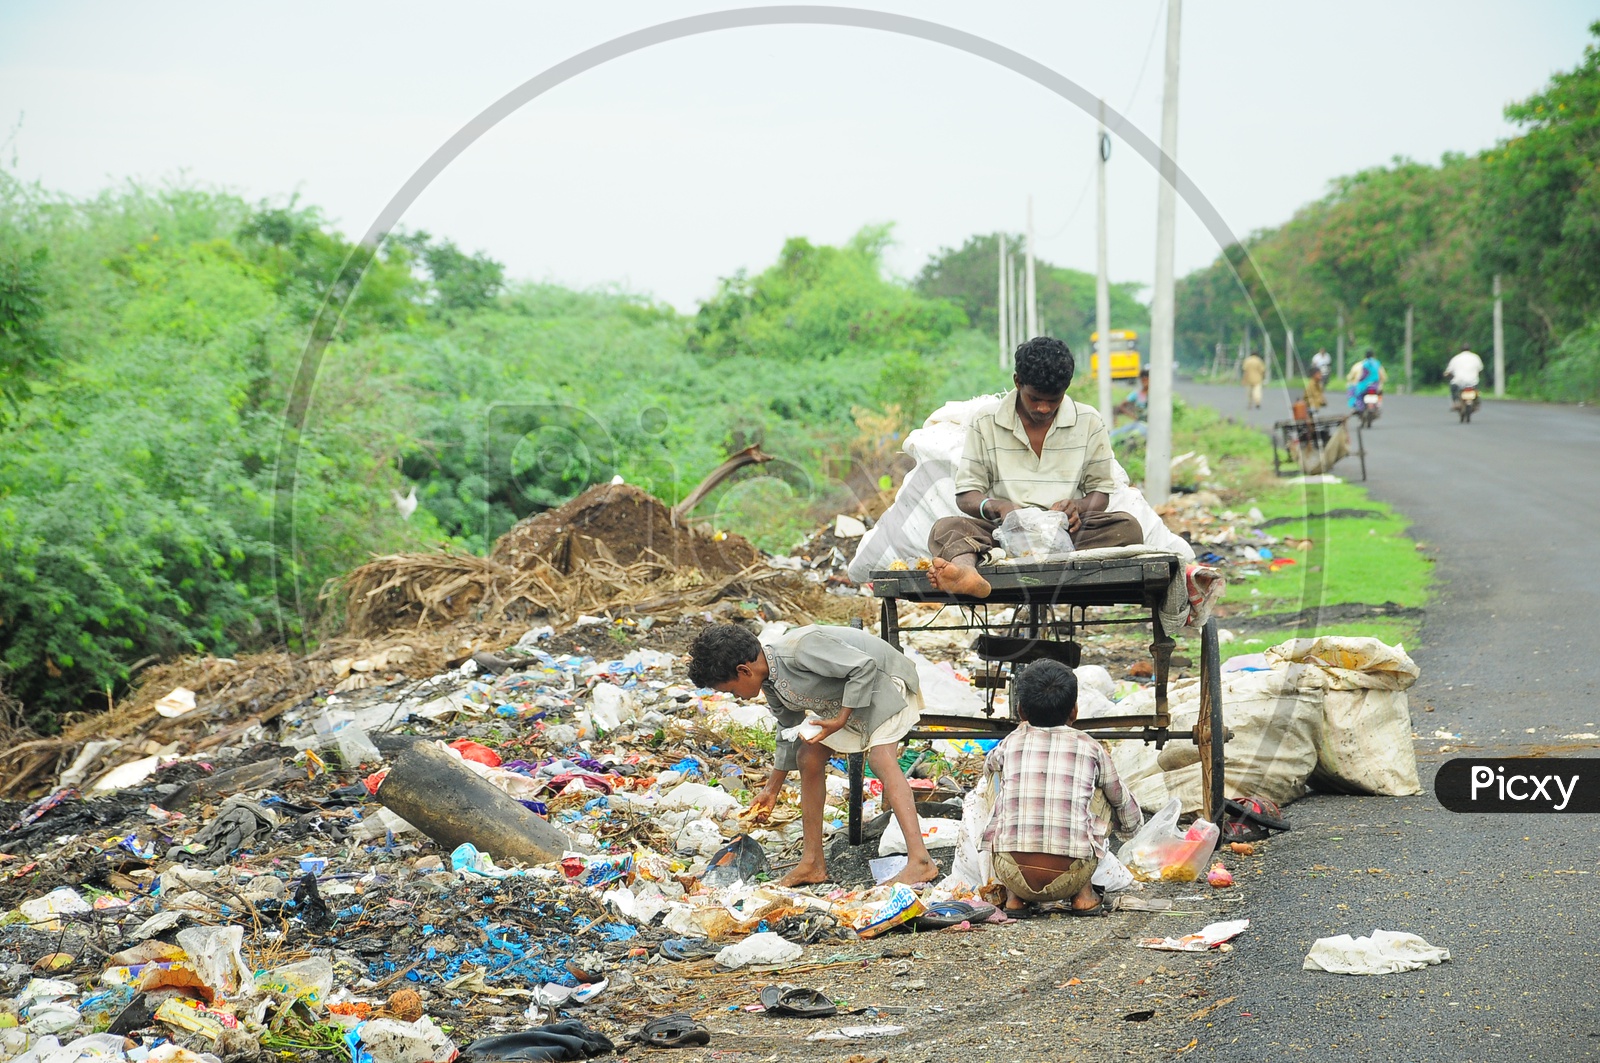 A Rag Pickers Family along side a road